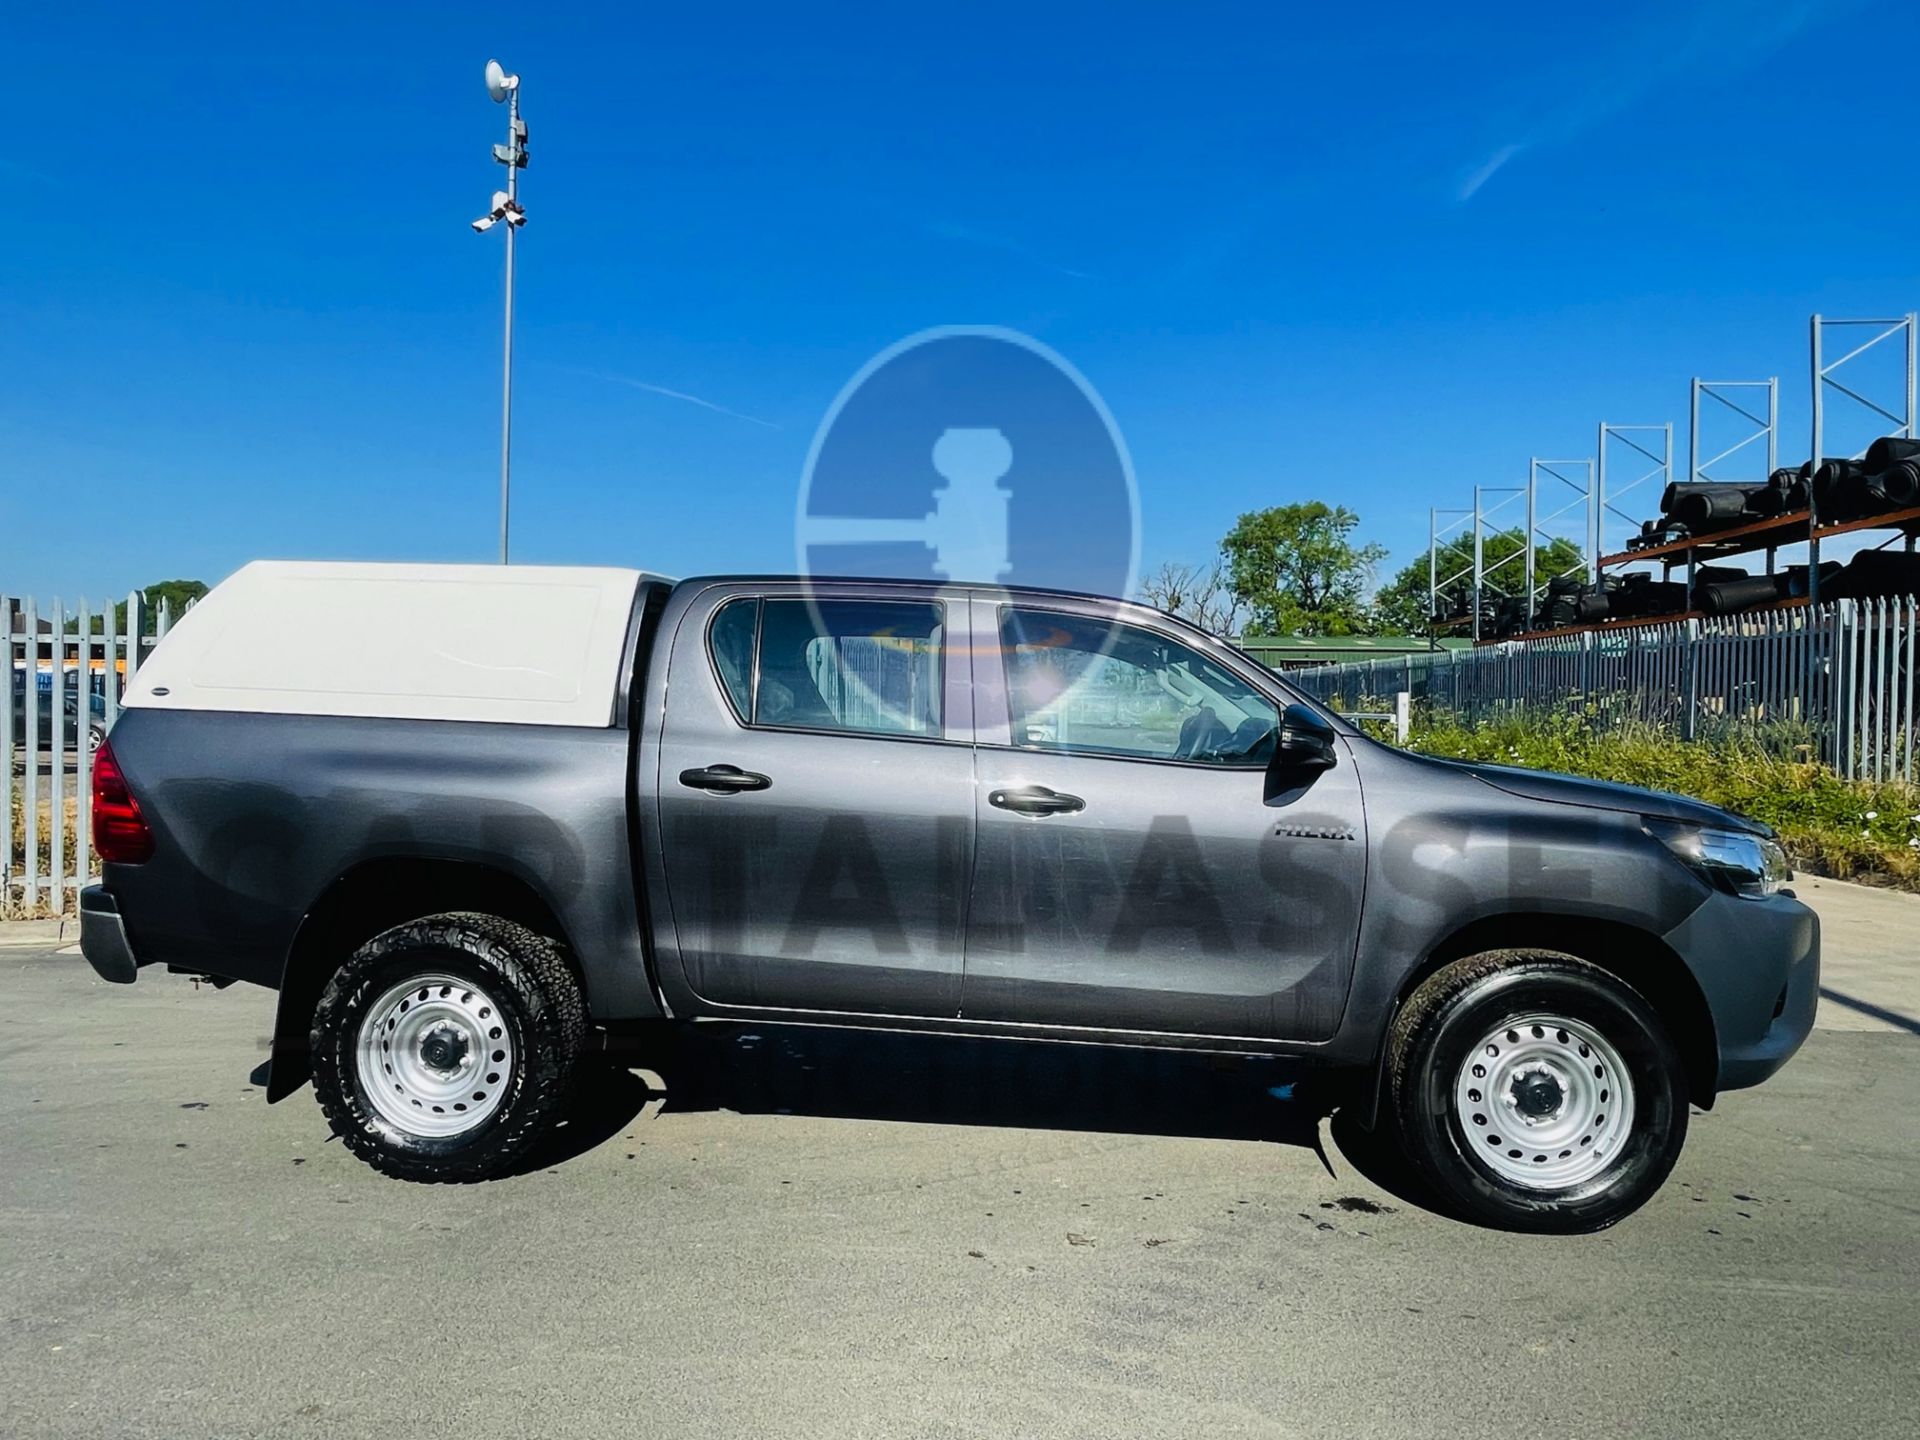 (On Sale) TOYOTA HILUX *DOUBLE CAB PICK-UP* (2018 - EURO 6) 2.4 D-4D - 6 SPEED *ONLY 52,000 MILES* - Image 14 of 43